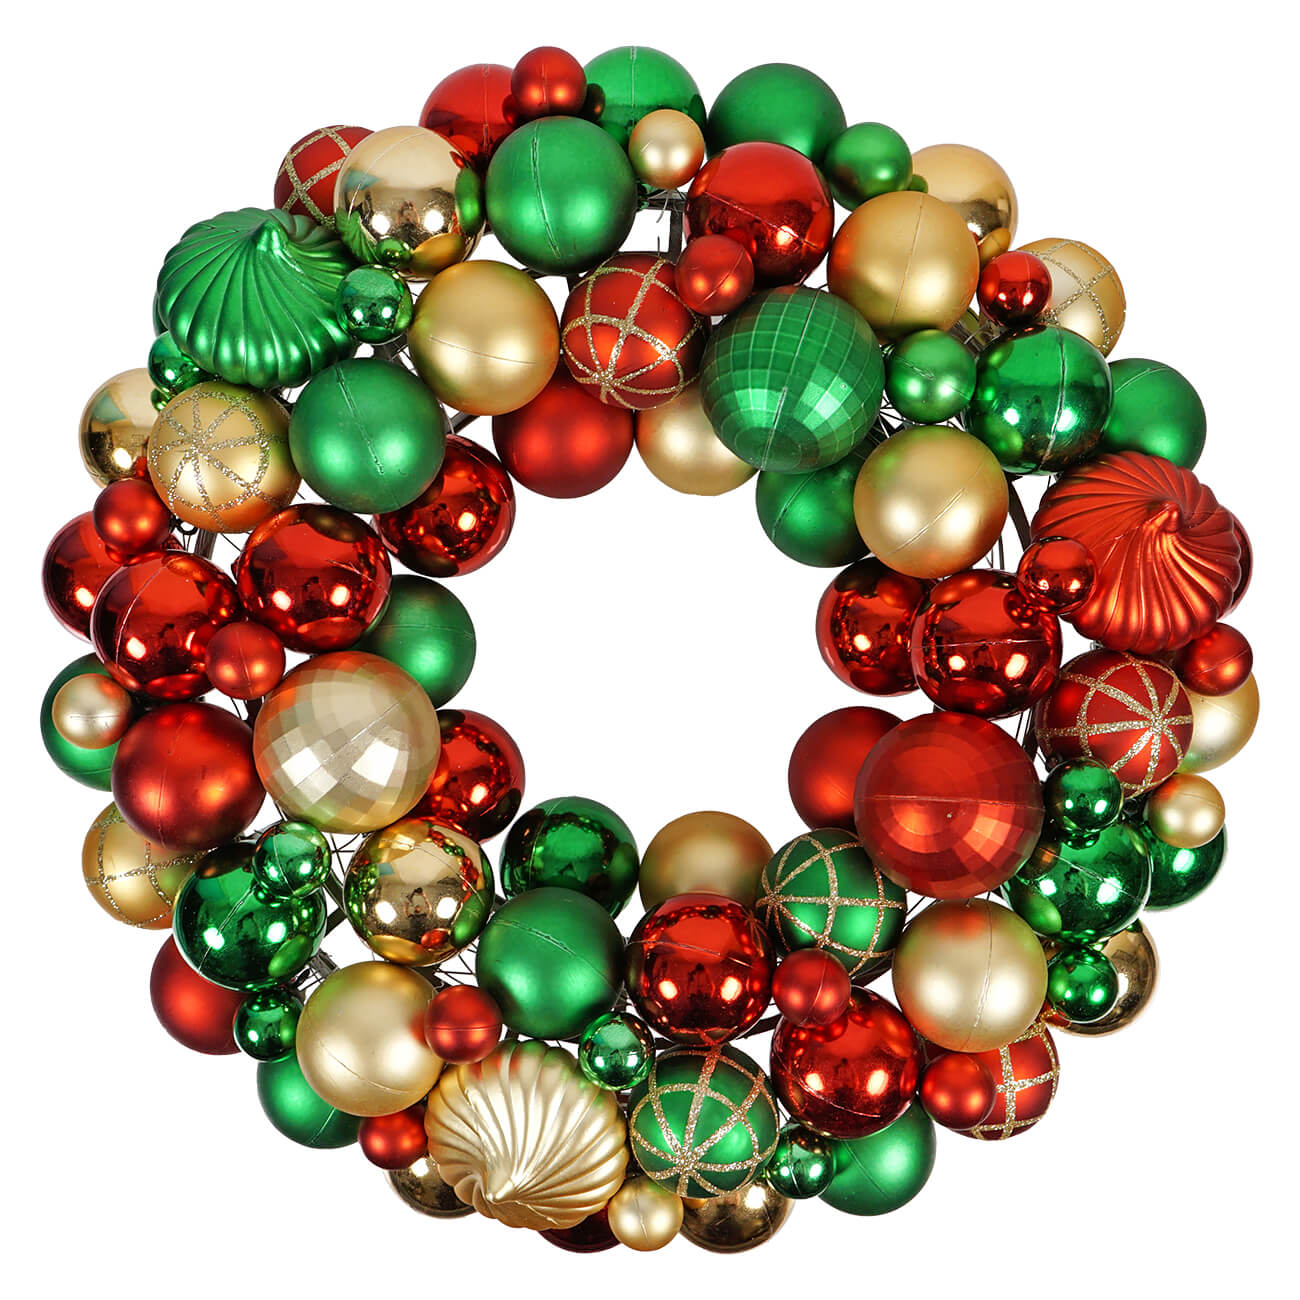 Green, Gold & Red Mixed Ball & Onion Wreath